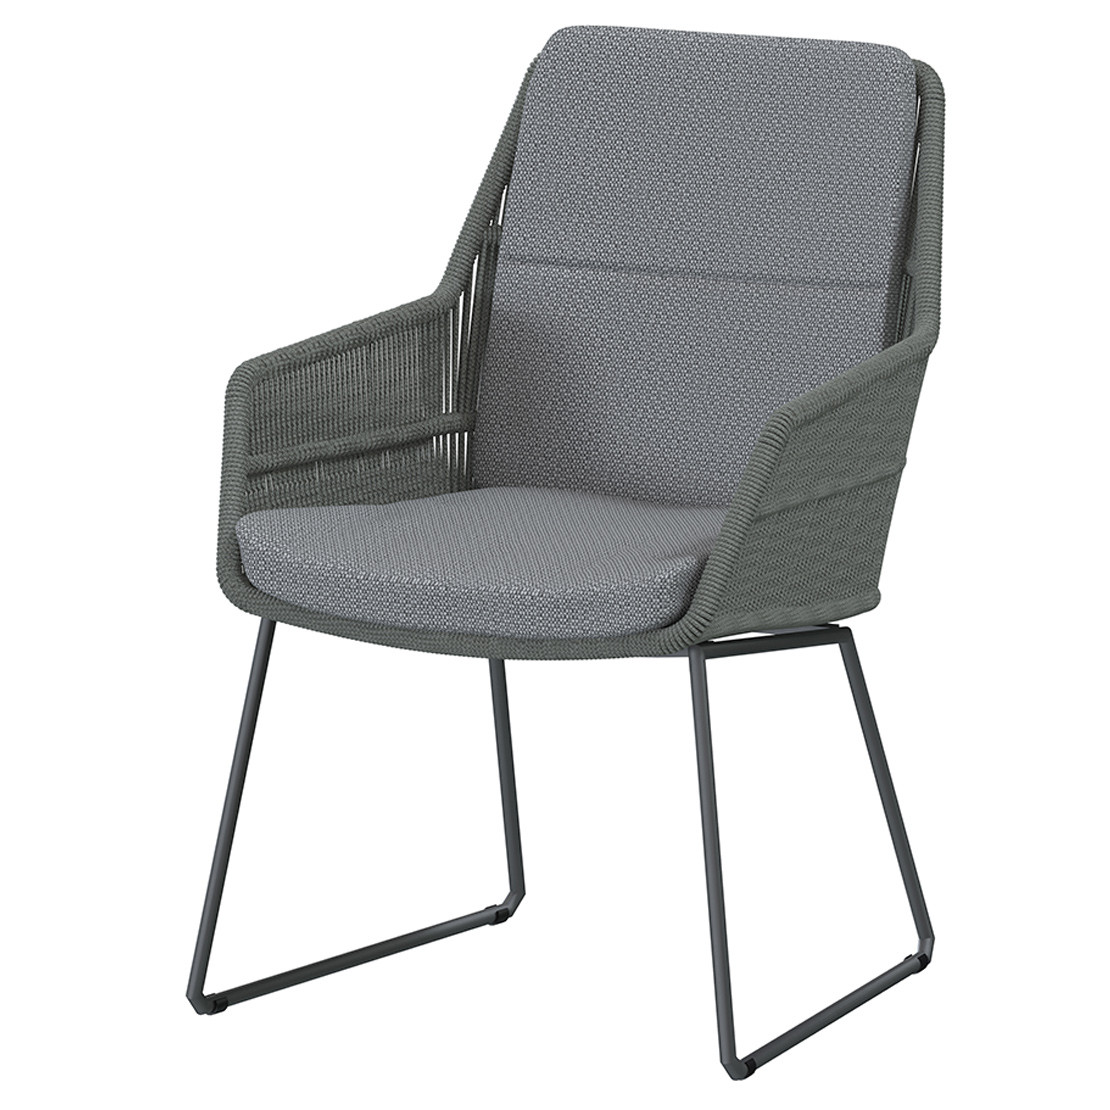 Valencia dining chair Platinum with 2 cushions